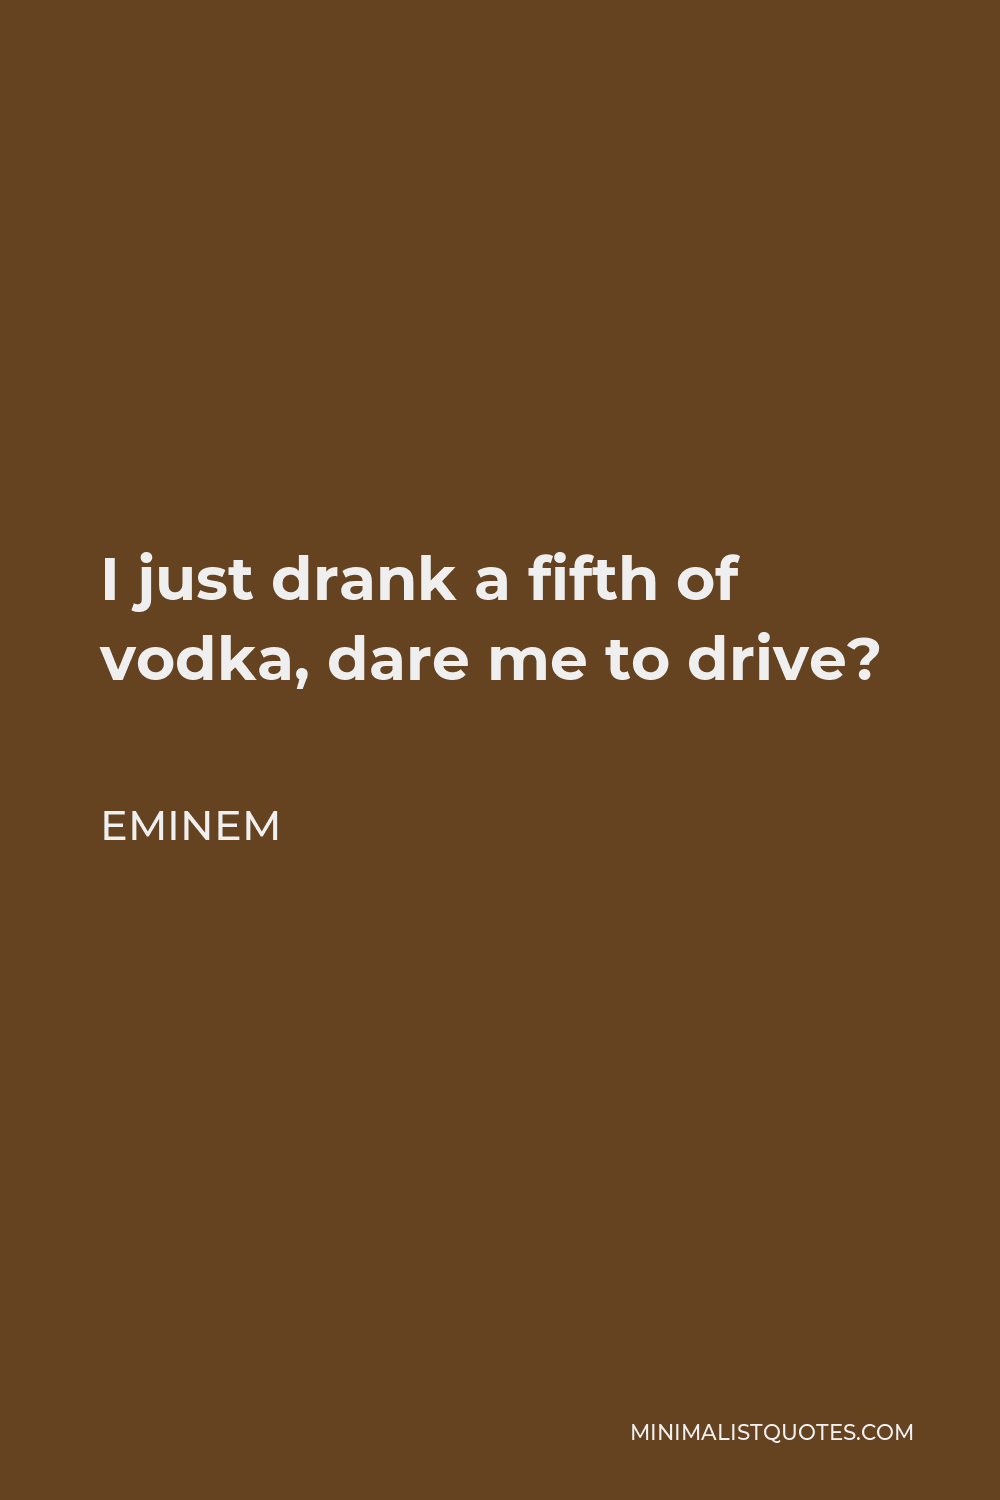 Eminem Quote: I just drank a fifth of vodka, dare me to drive?